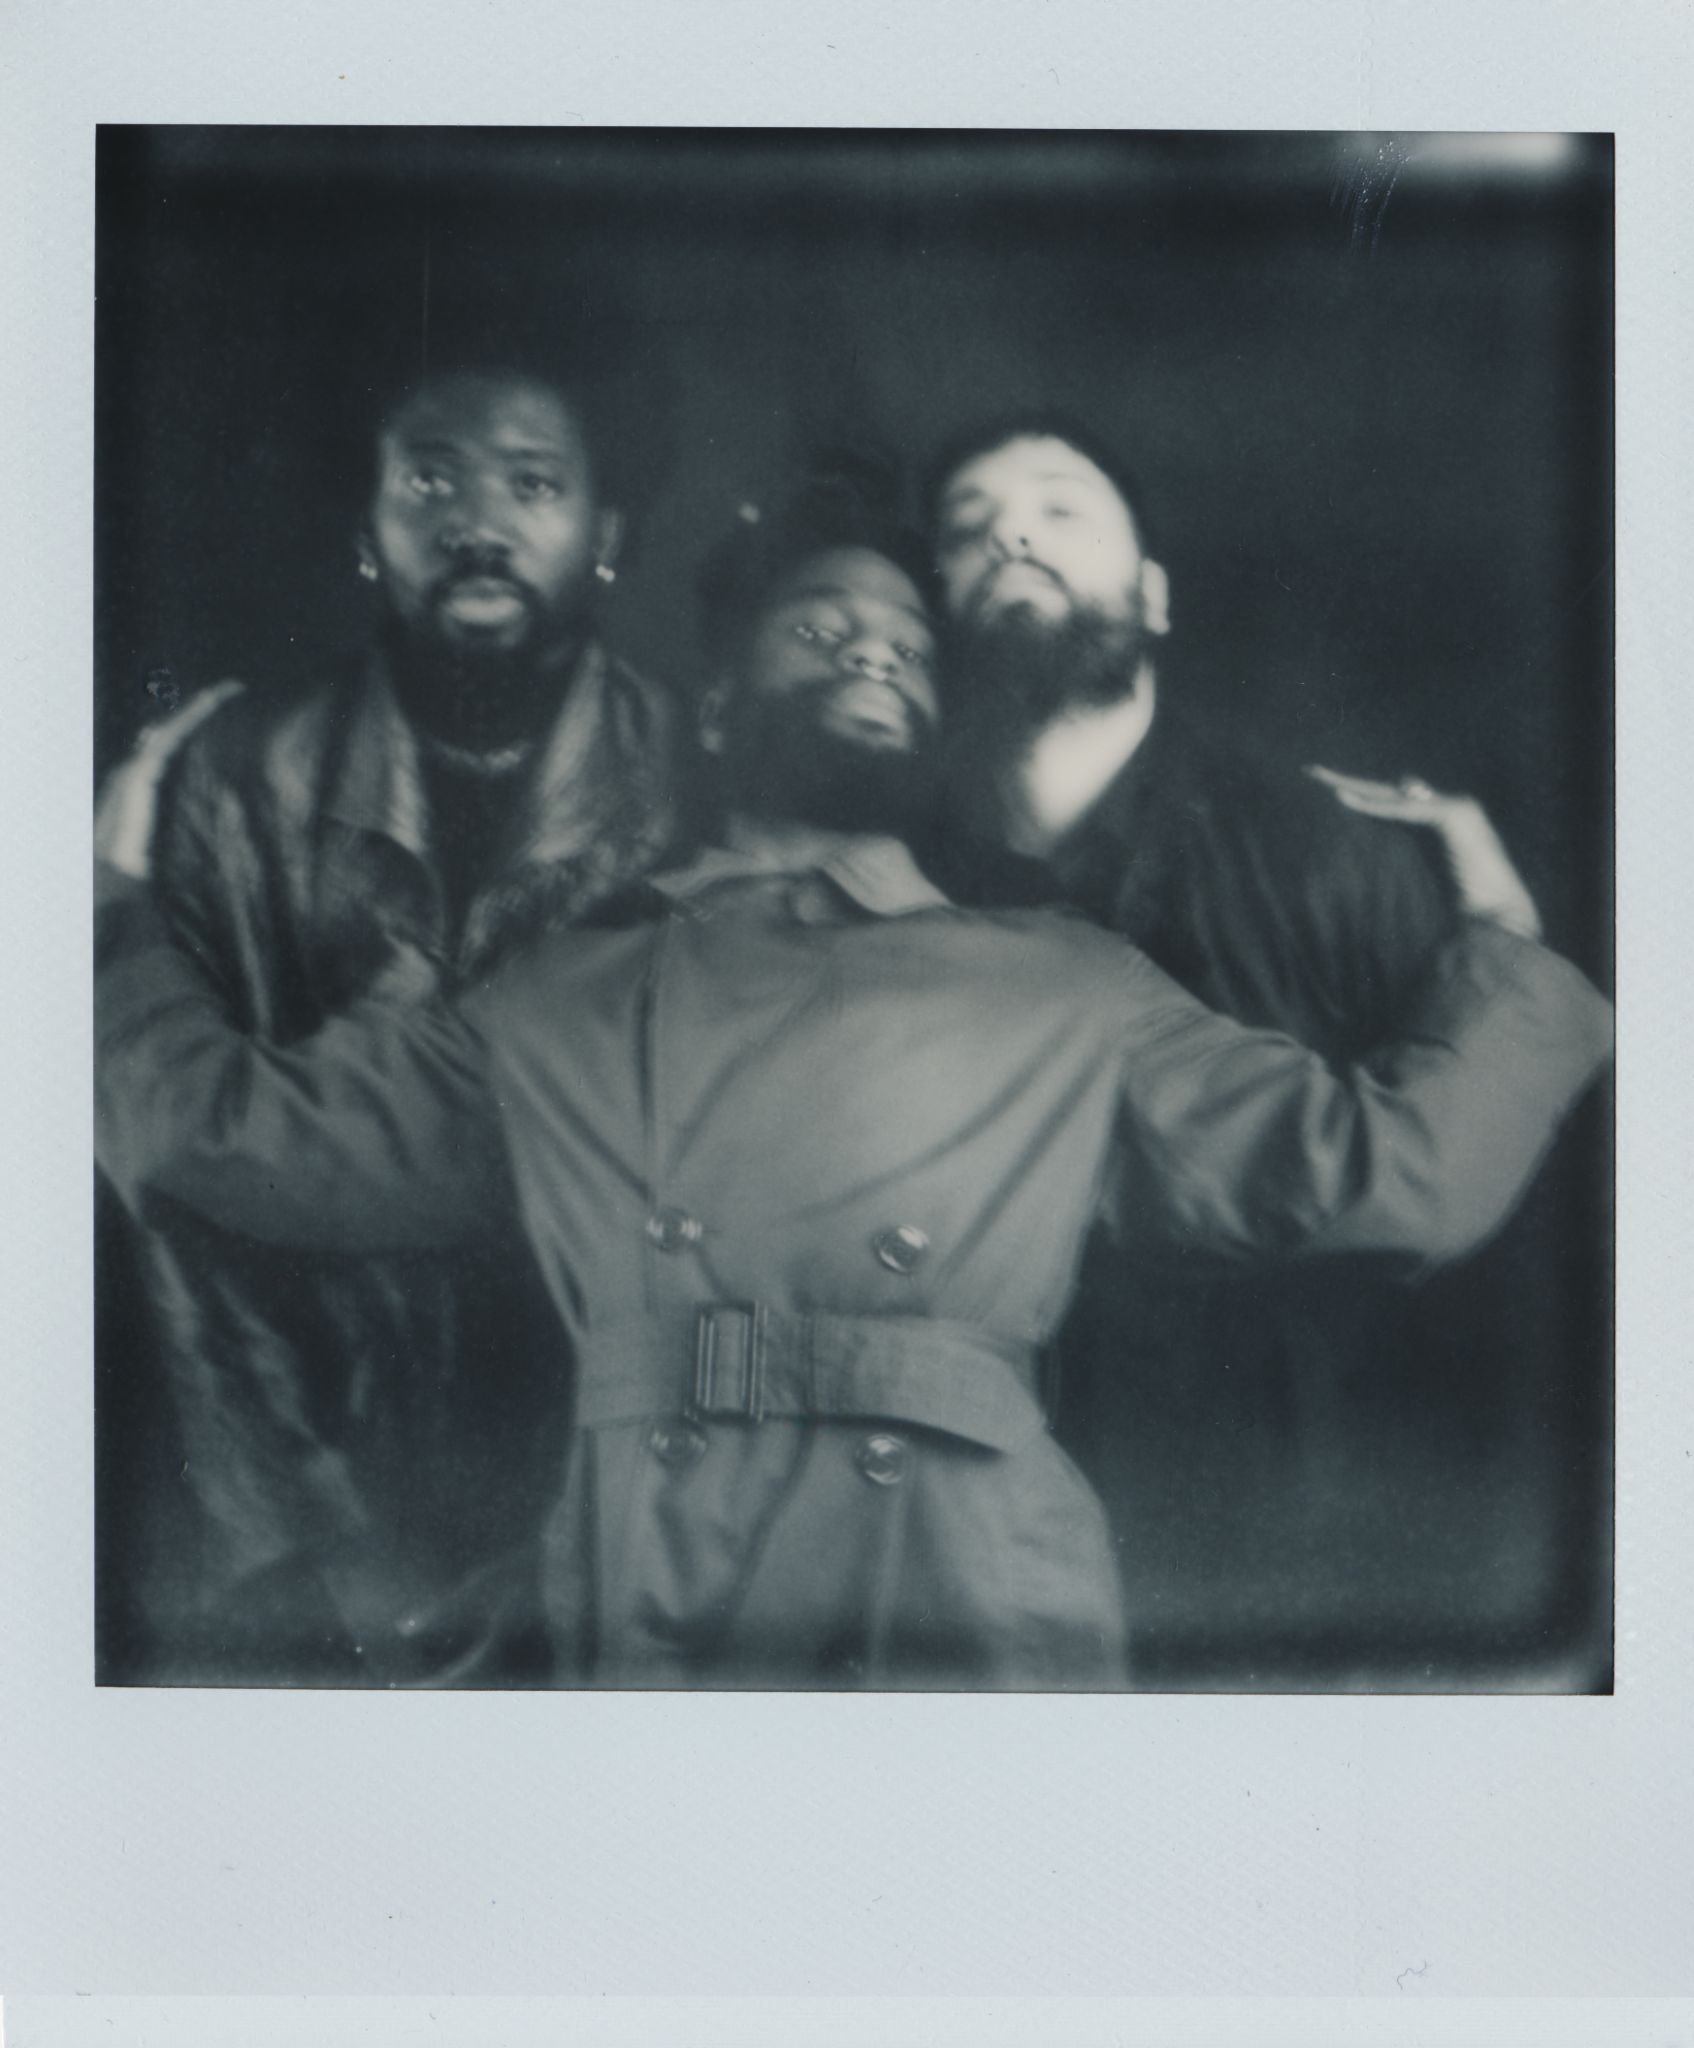 Young Fathers in a black and white polaroid photo.